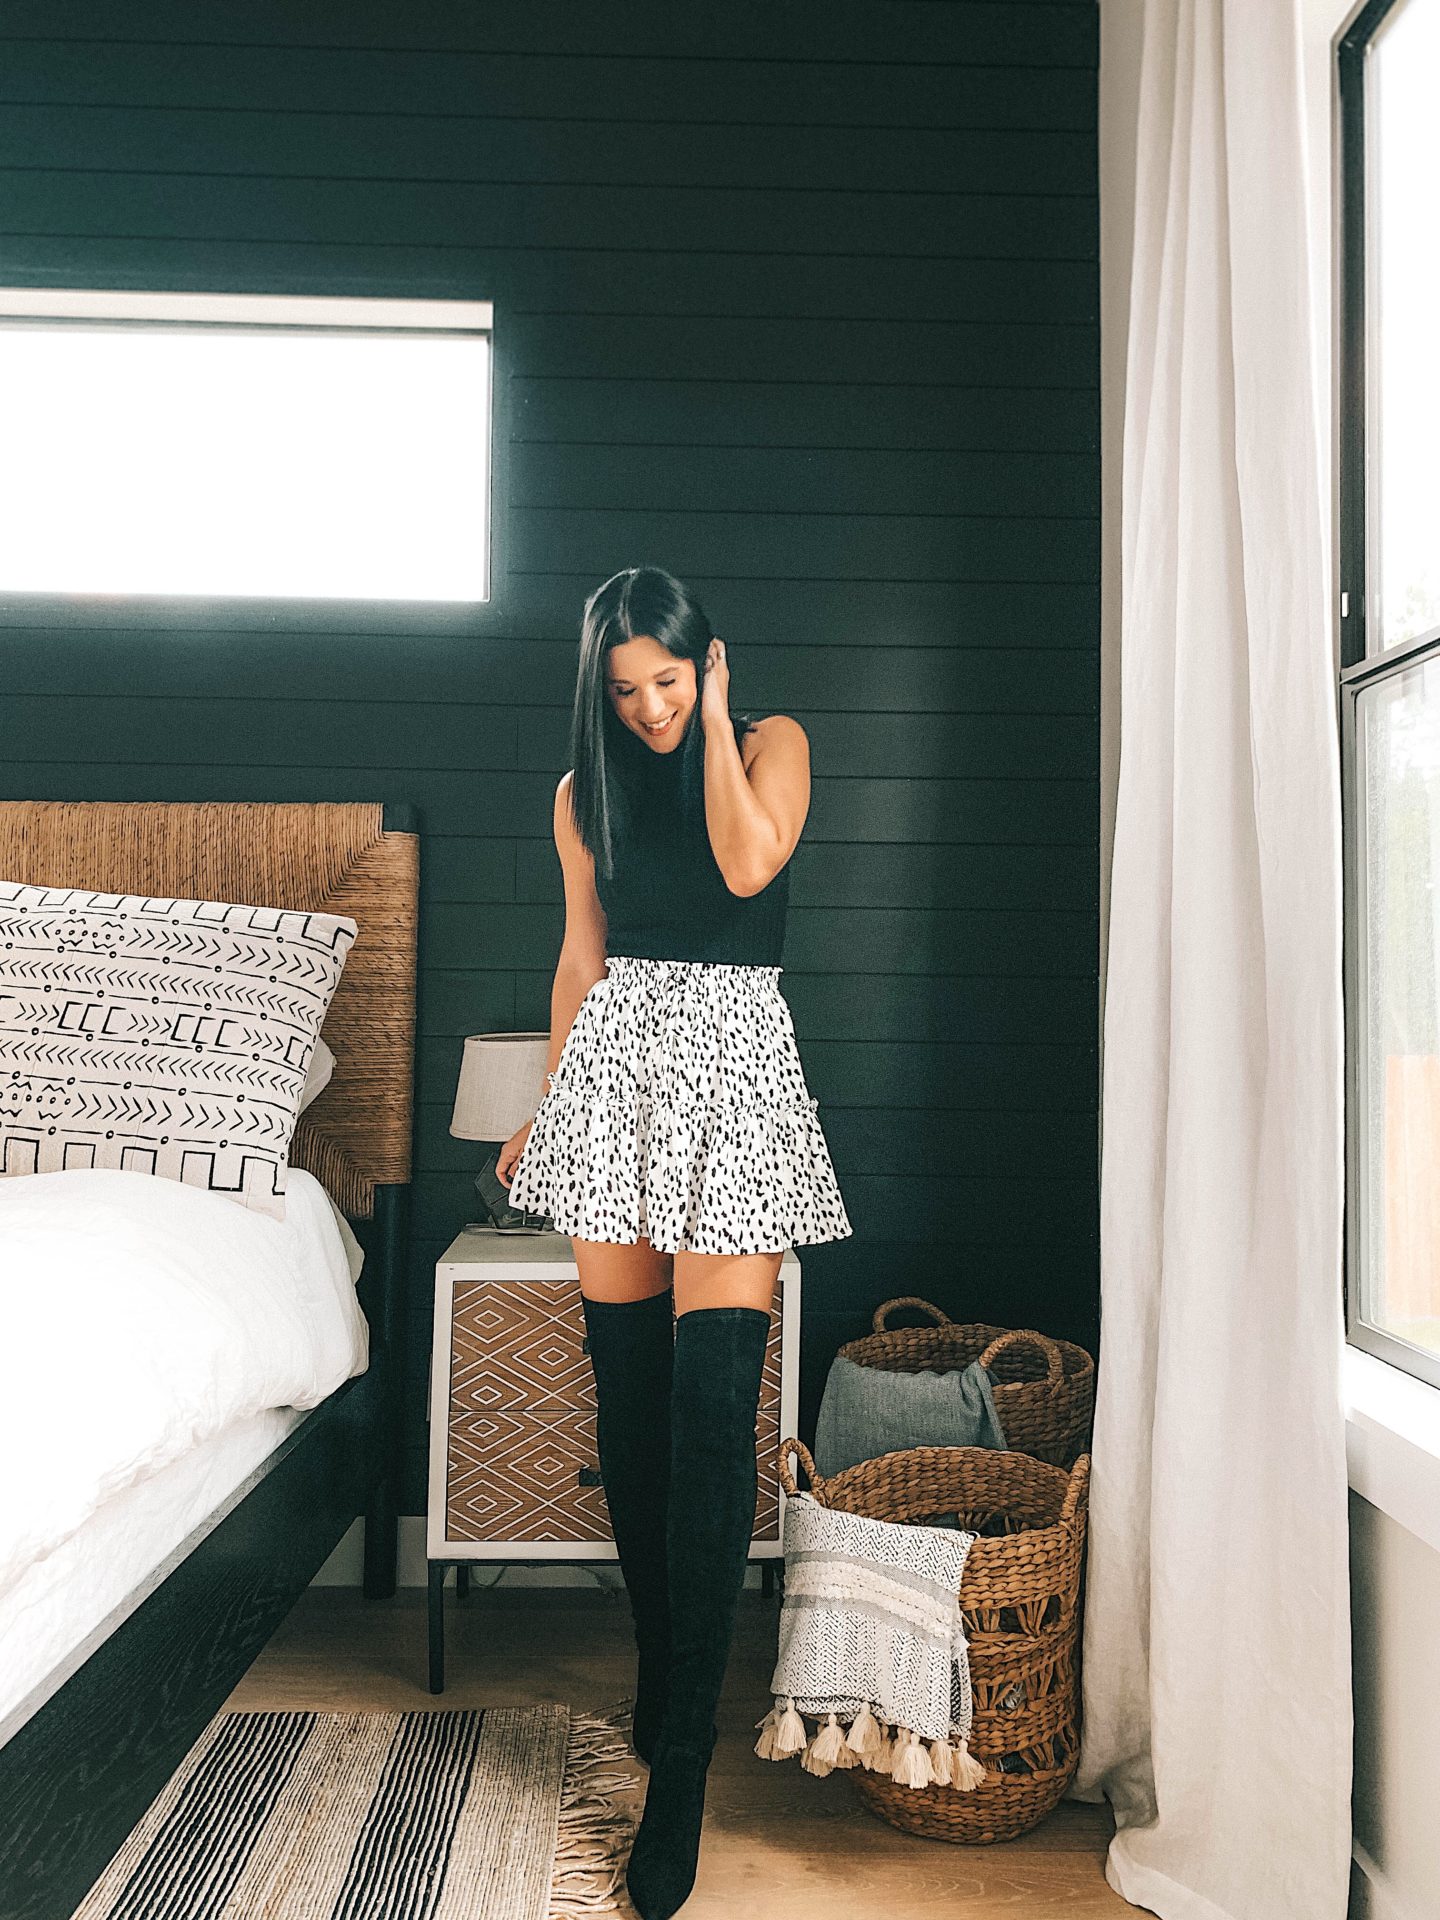 Transition Your Summer Looks Into Fall with Princess Polly Clothing by popular Austin fashion blog, Dressed to Kill: image of a woman wearing a Princess Polly black sweater tank, over the knee boots, and black and white dot mini skirt.